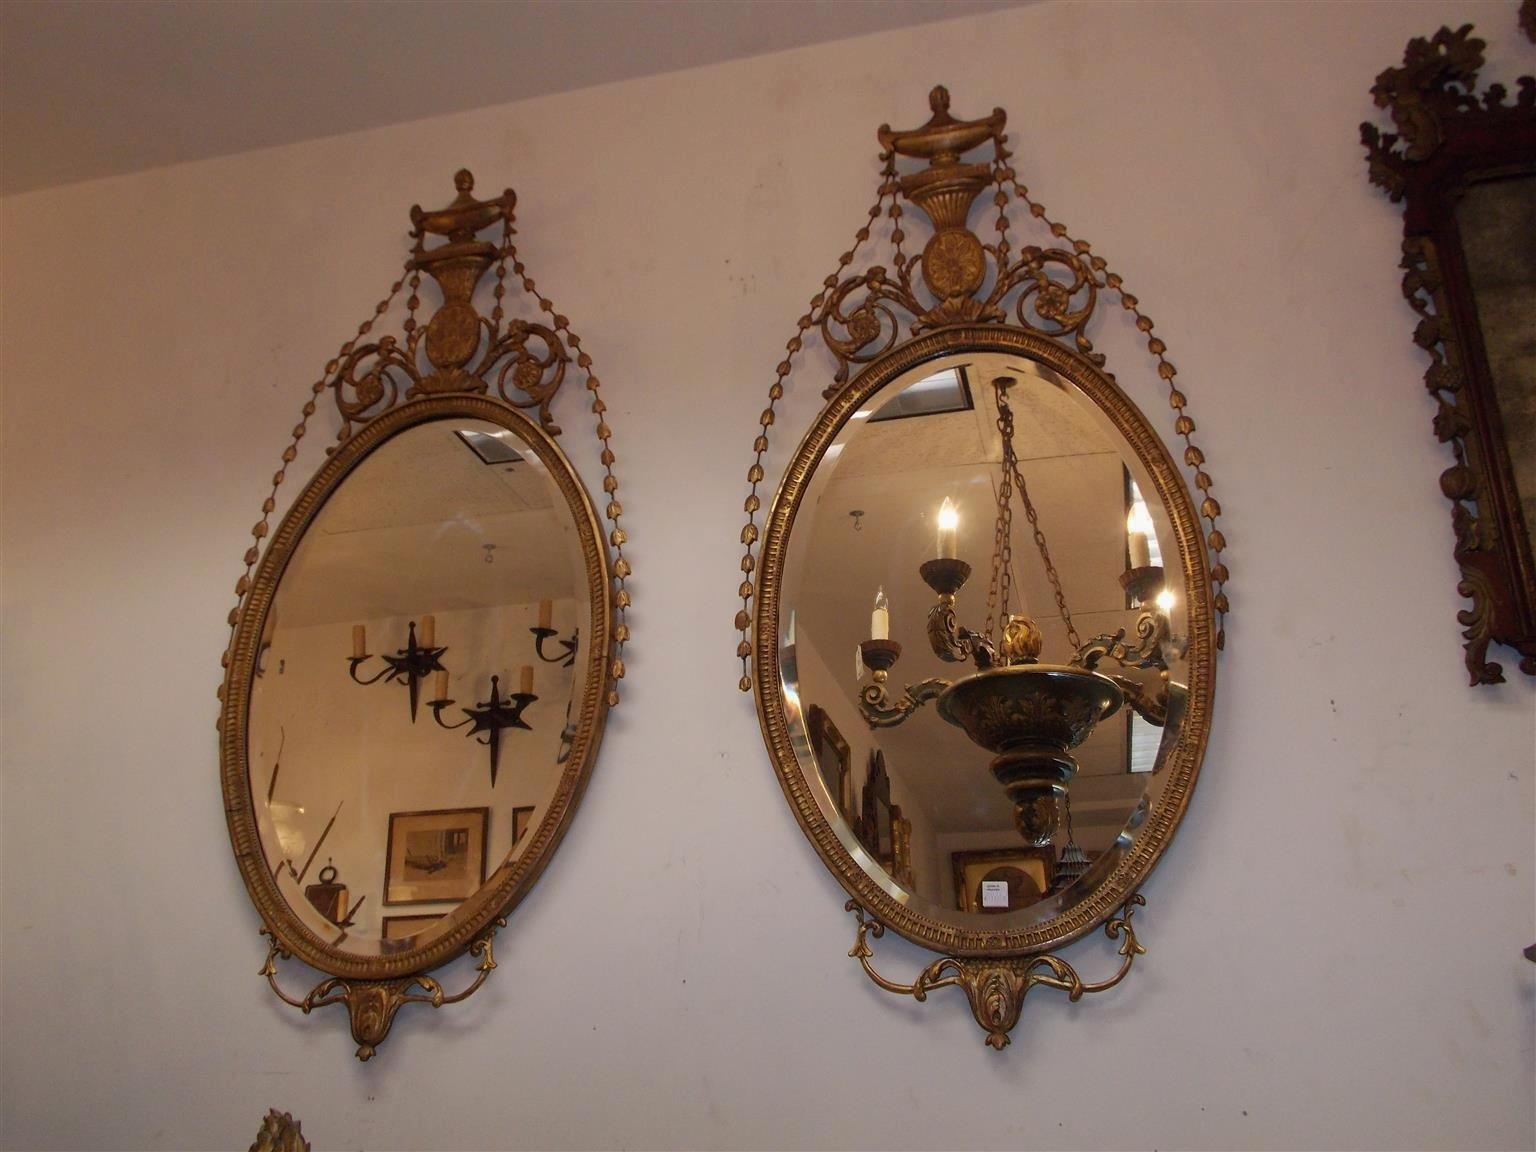 George III Pair of English Adam Oval Urn & Bell Flower Mirrors with Beveled Glass, C. 1800 For Sale